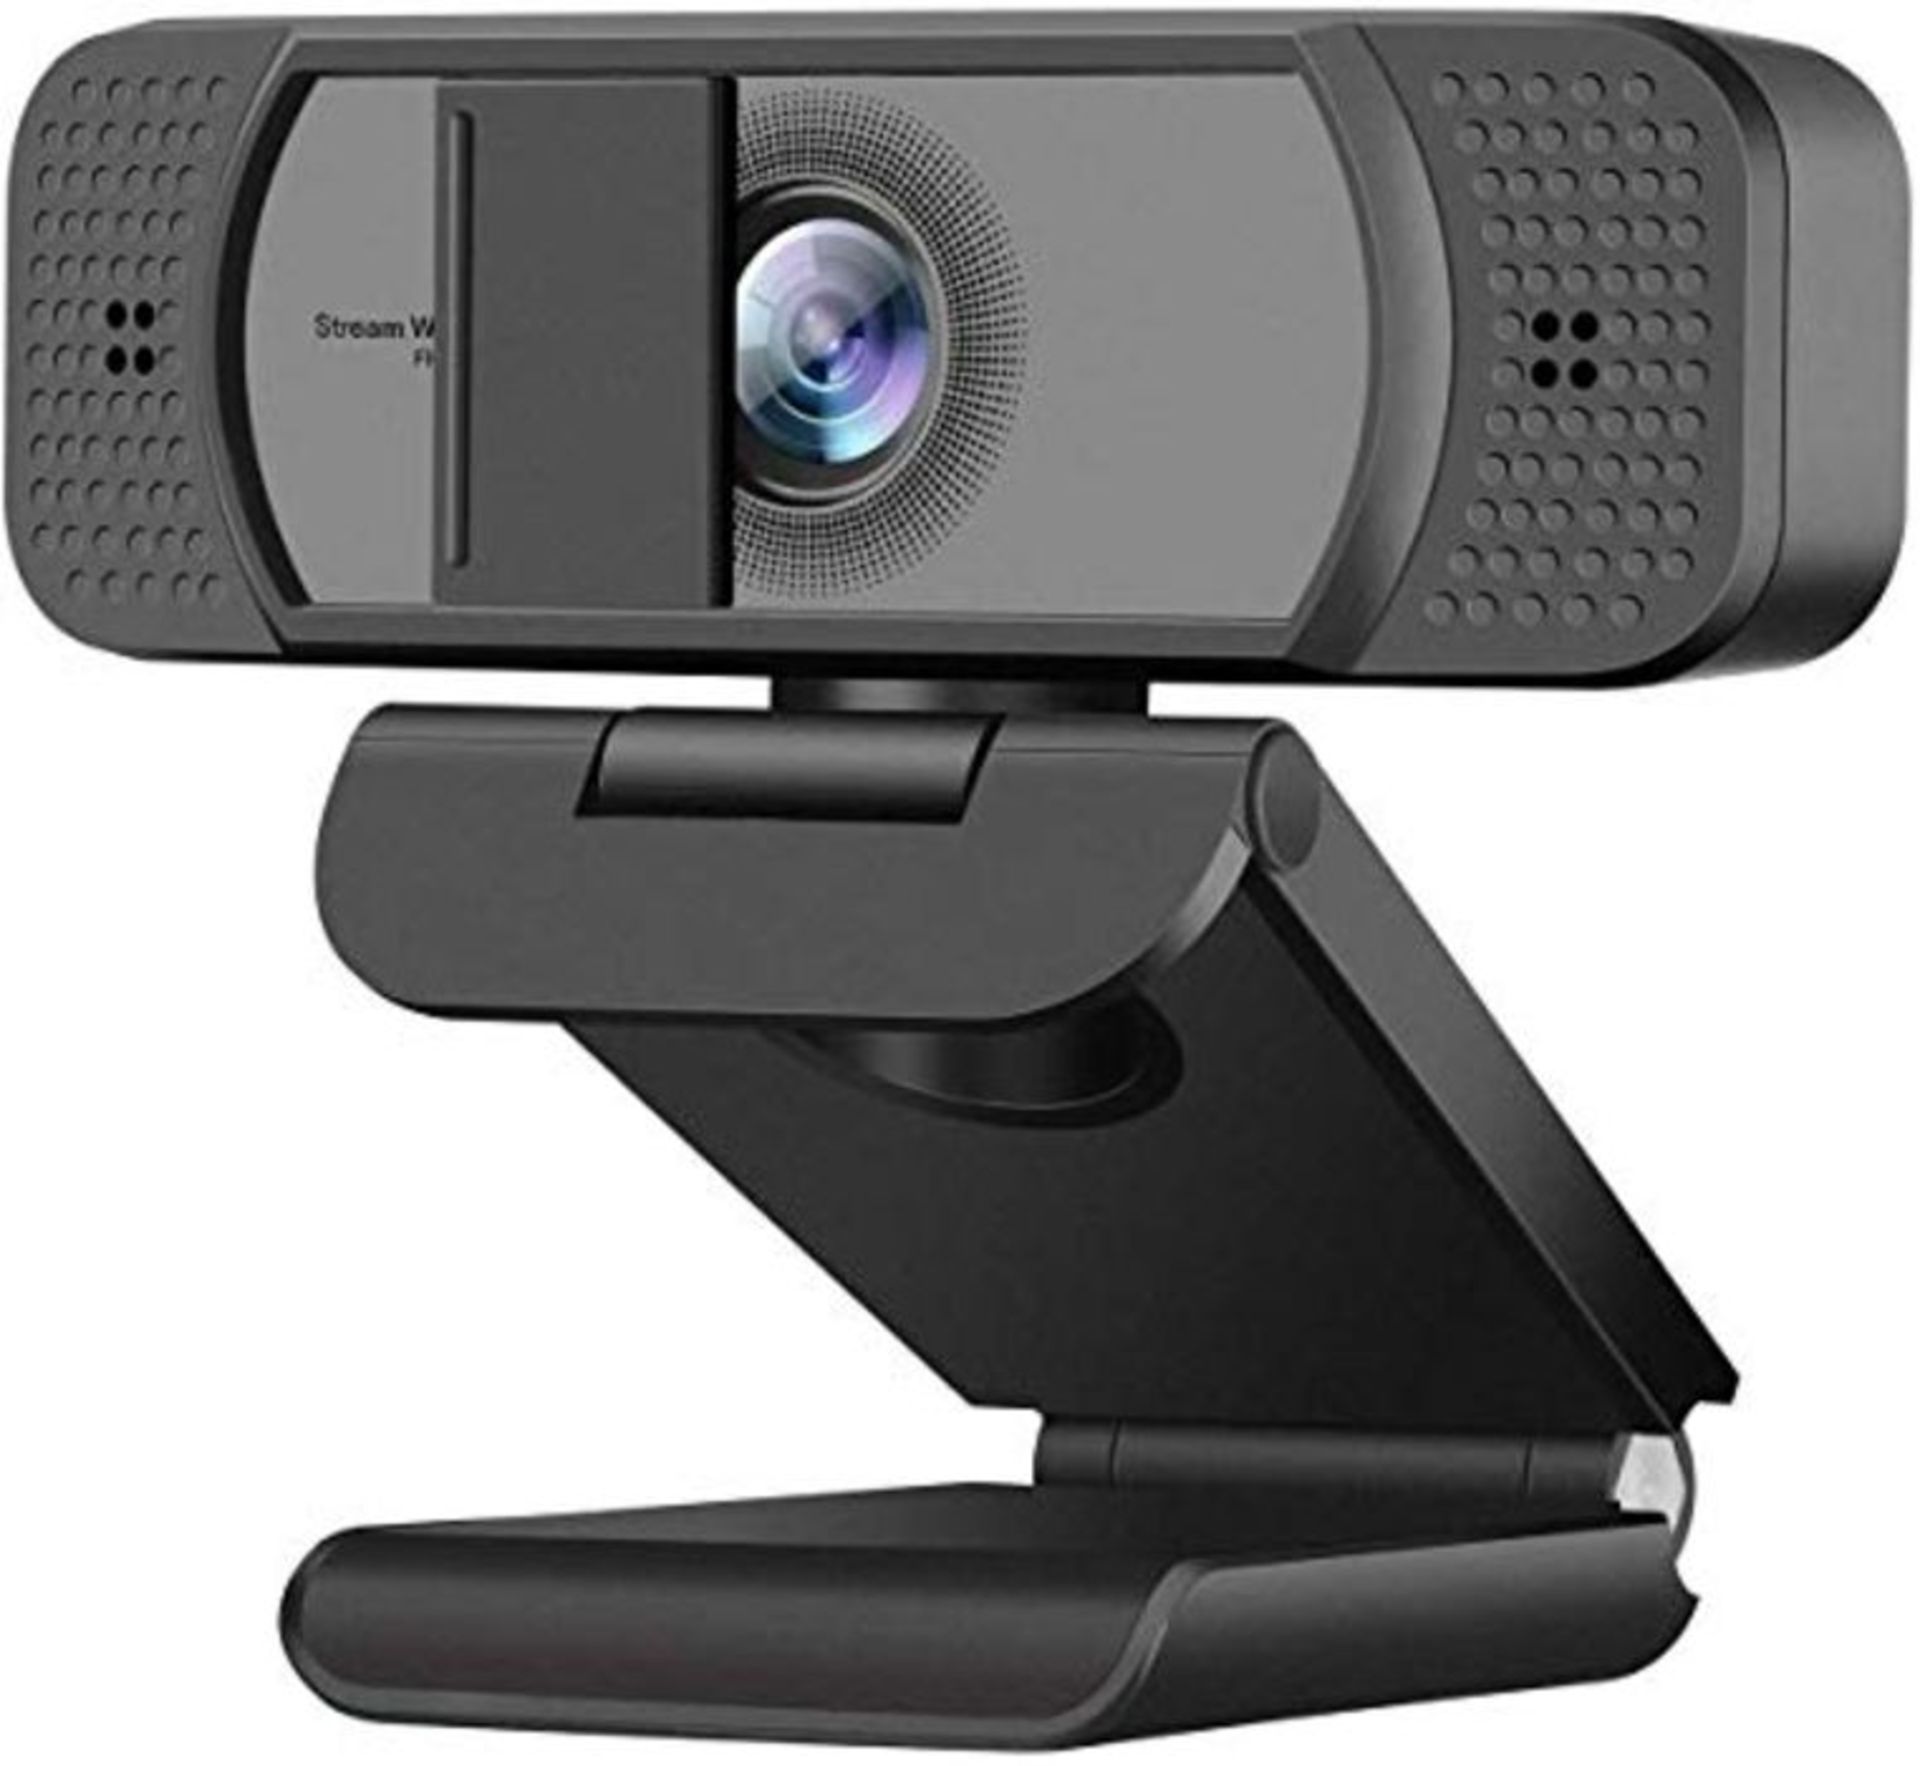 [CRACKED] Webcam HD 1080p-Streaming Webcam with Privacy Cover for Desktop Computer PC,